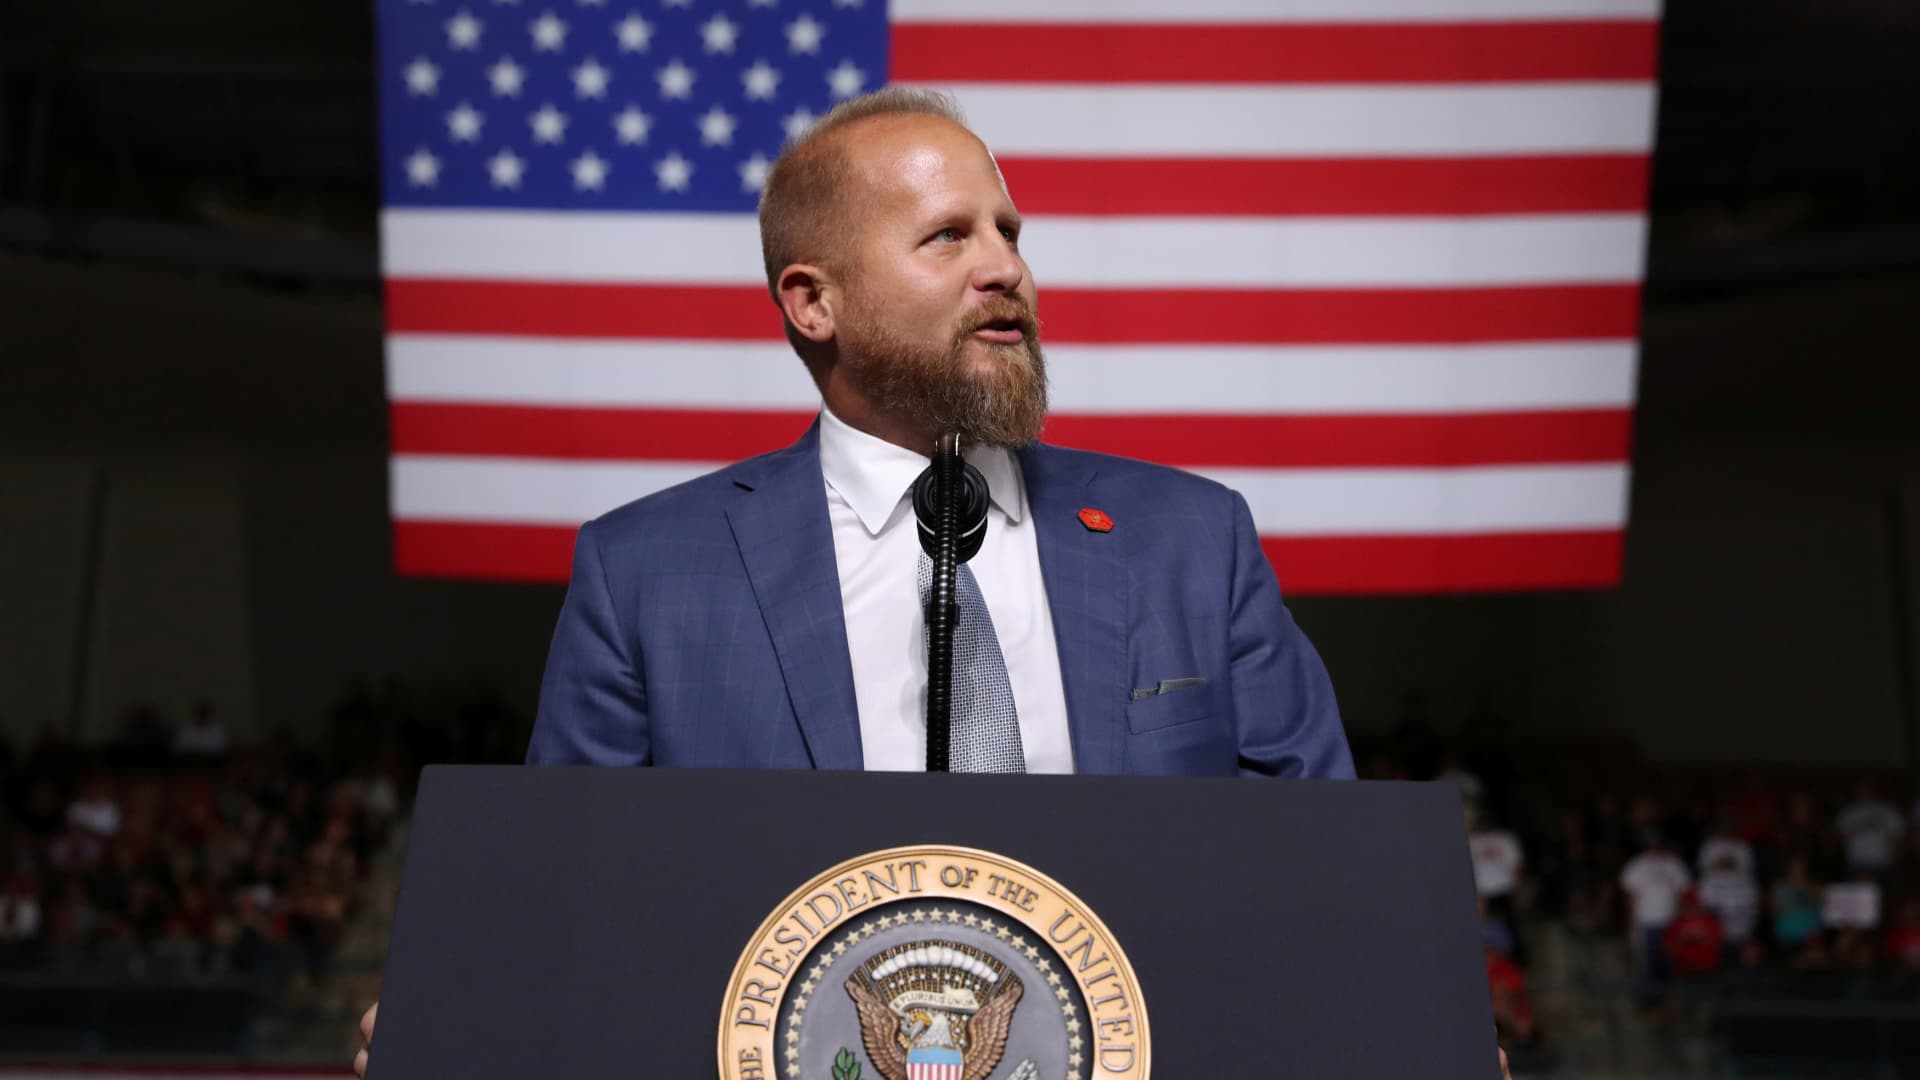 Trump 2020 campaign manager Brad Parscale addresses the crowd before U.S. President Donald Trump rallies with supporters in Manchester, New Hampshire, U.S. August 15, 2019.